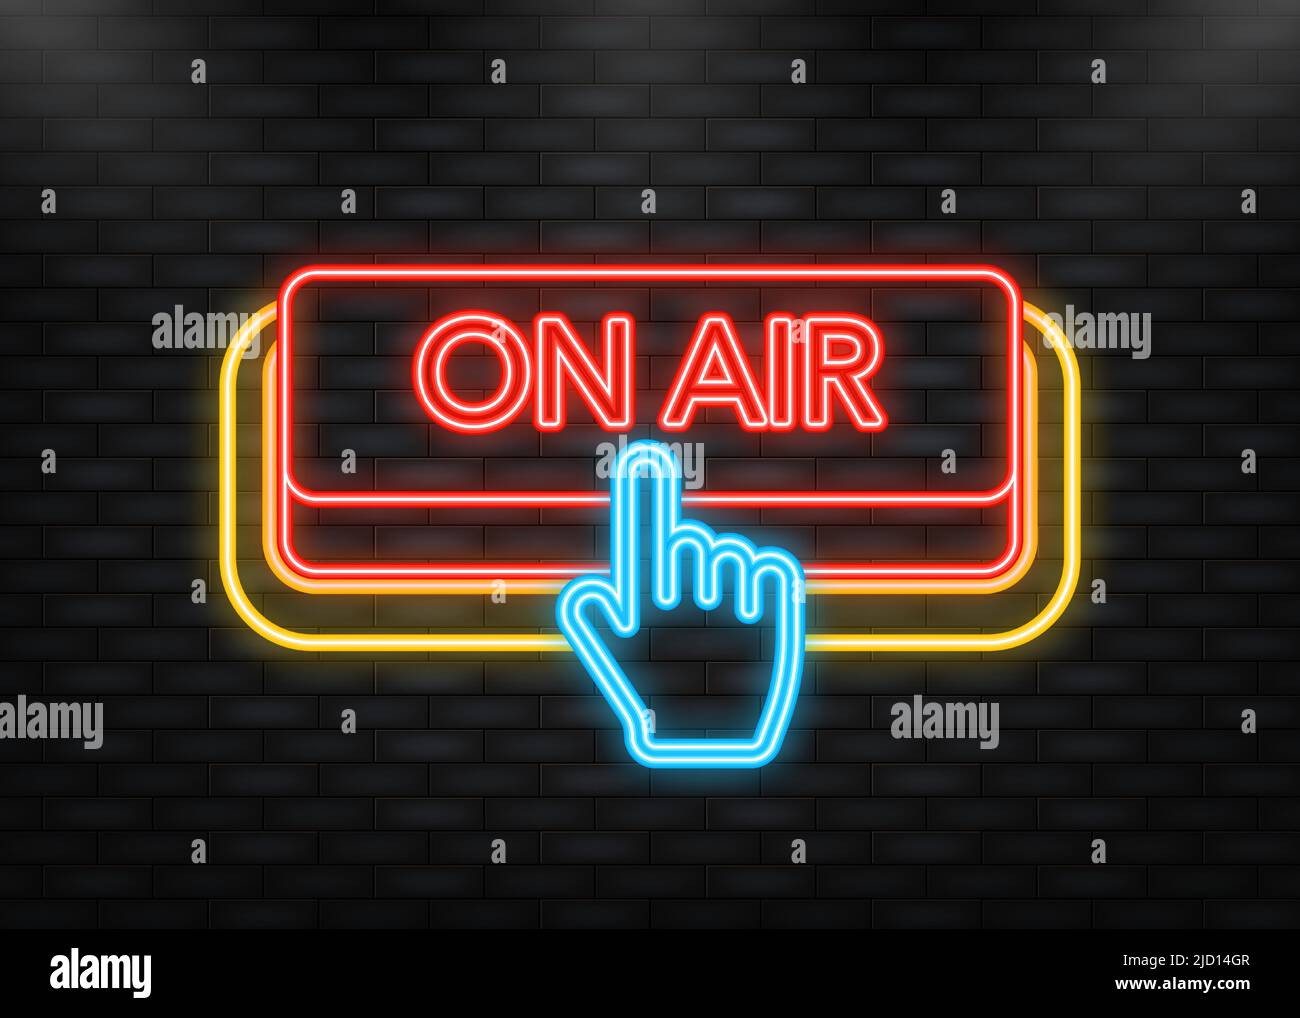 https://c8.alamy.com/comp/2JD14GR/neon-icon-on-air-red-button-on-white-backround-vector-illustration-2JD14GR.jpg